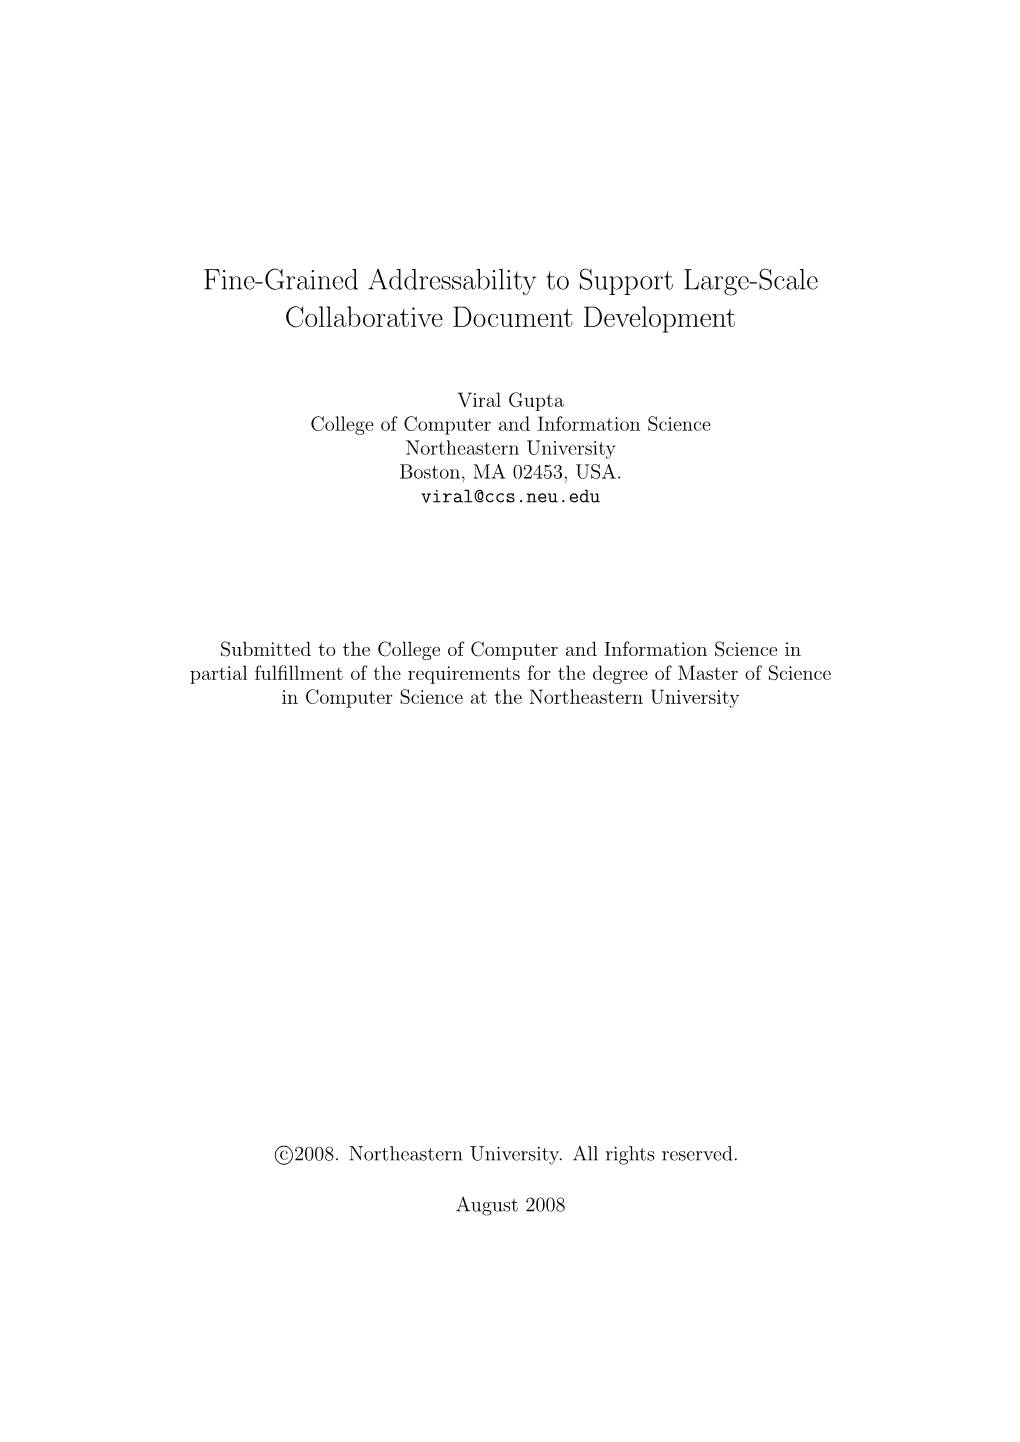 Fine-Grained Addressability to Support Large-Scale Collaborative Document Development